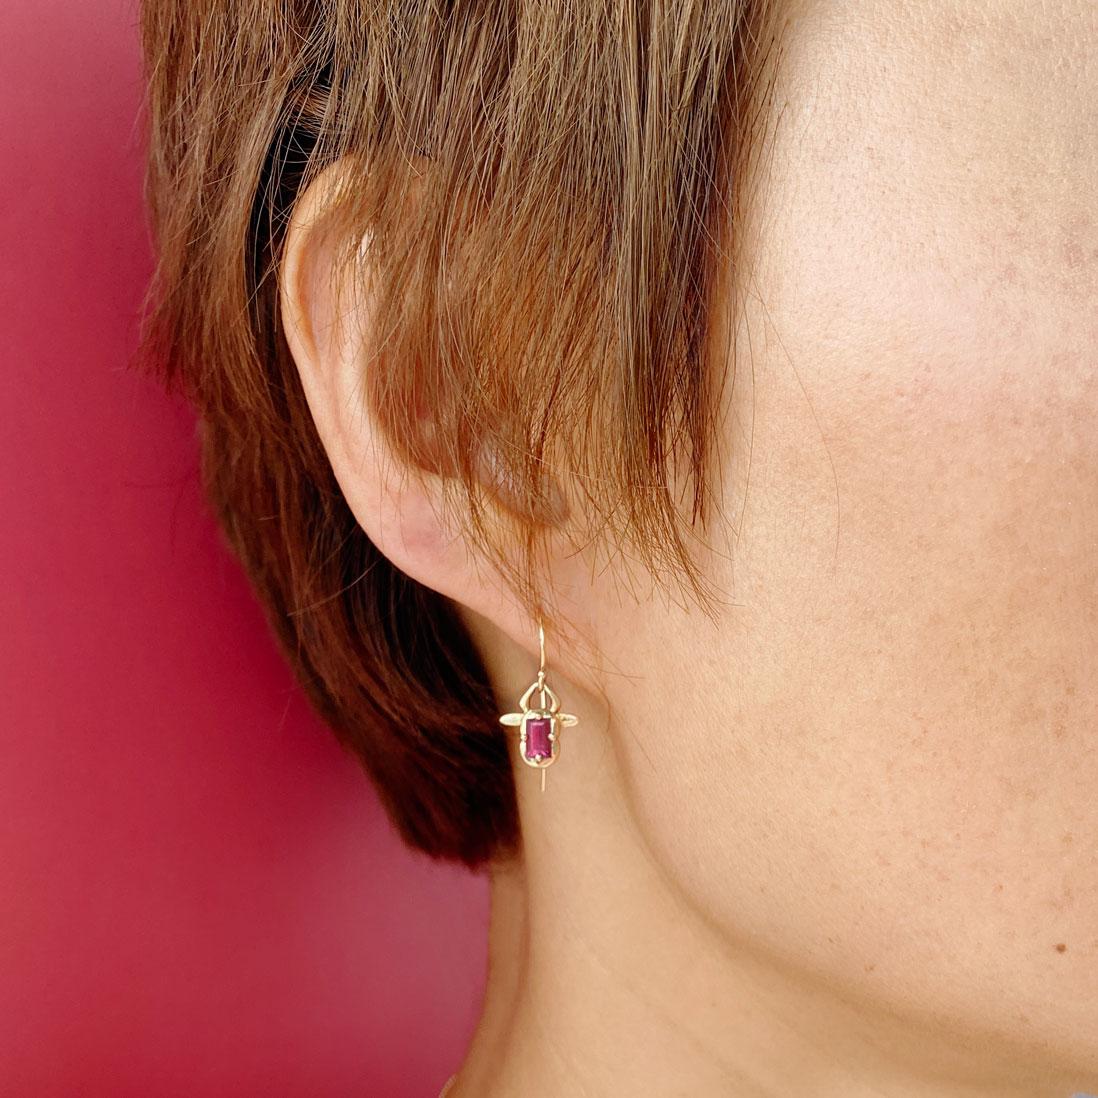 The 14k Yellow Gold Red Tourmaline Bull Ox Animal Earrings by Baubou are handcrafted in New York and feature a pinkish red 0.58 carat emerald cut tourmaline. The earrings measure approximately 10mm x 10.8mm with french wire. The logo is engraved on